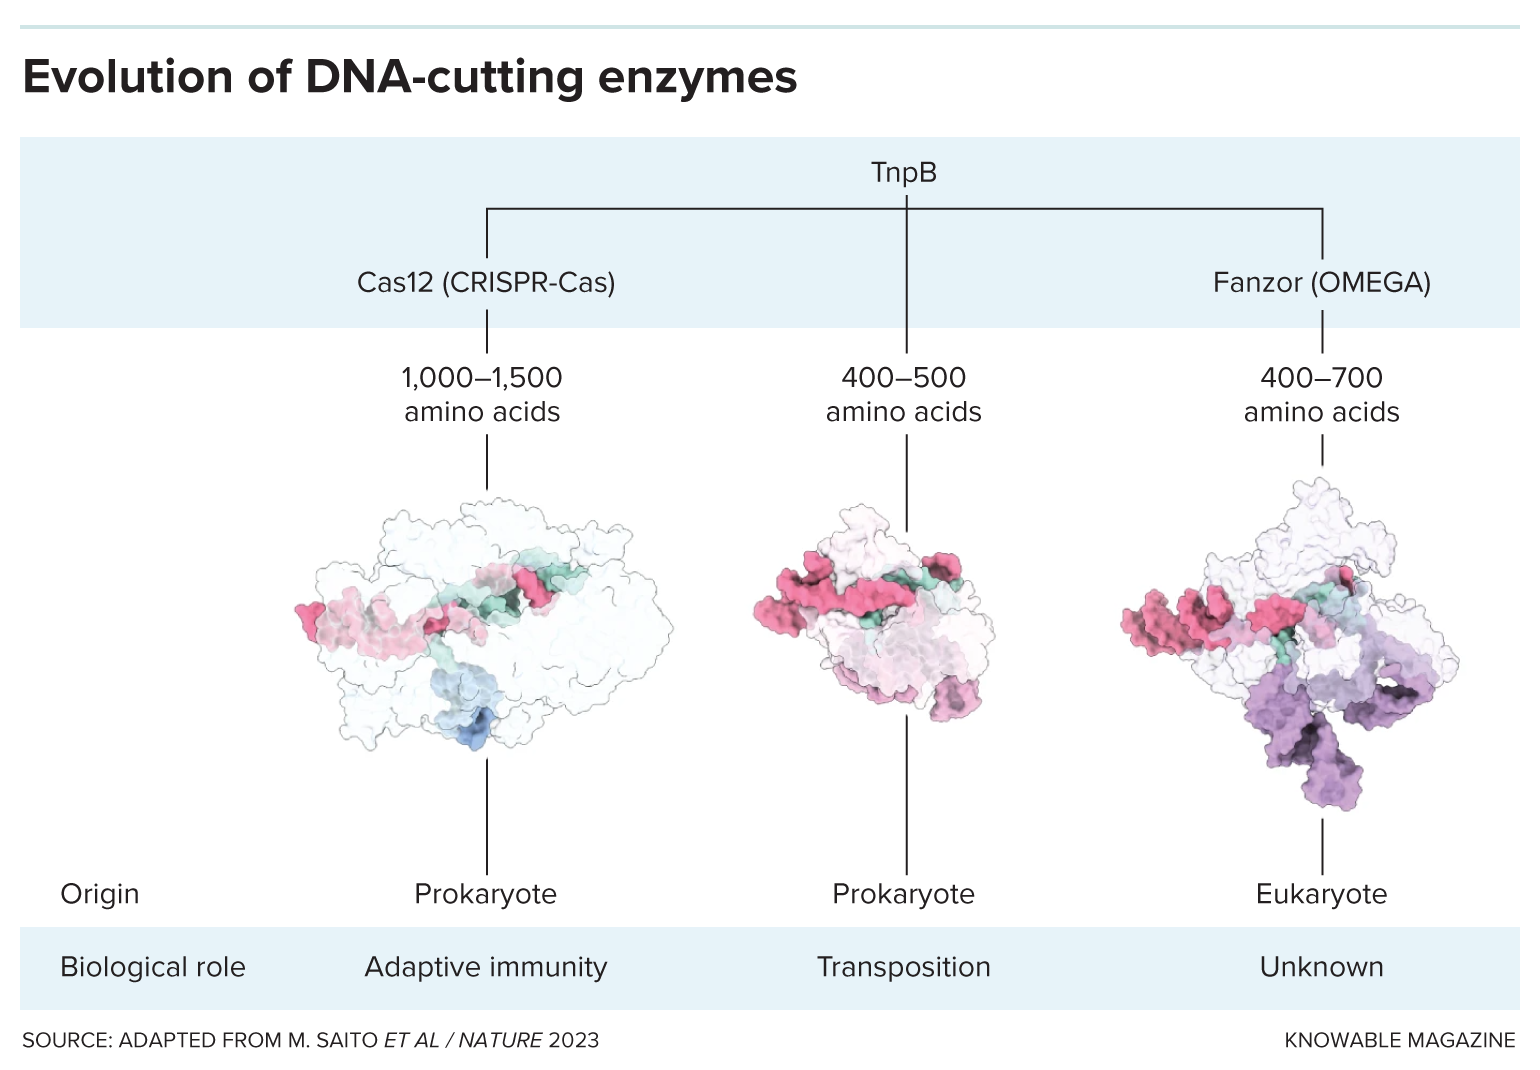 A three-part family tree shows how TnpB evolved into CRISPR-Cas and Fanzor gene-altering systems.